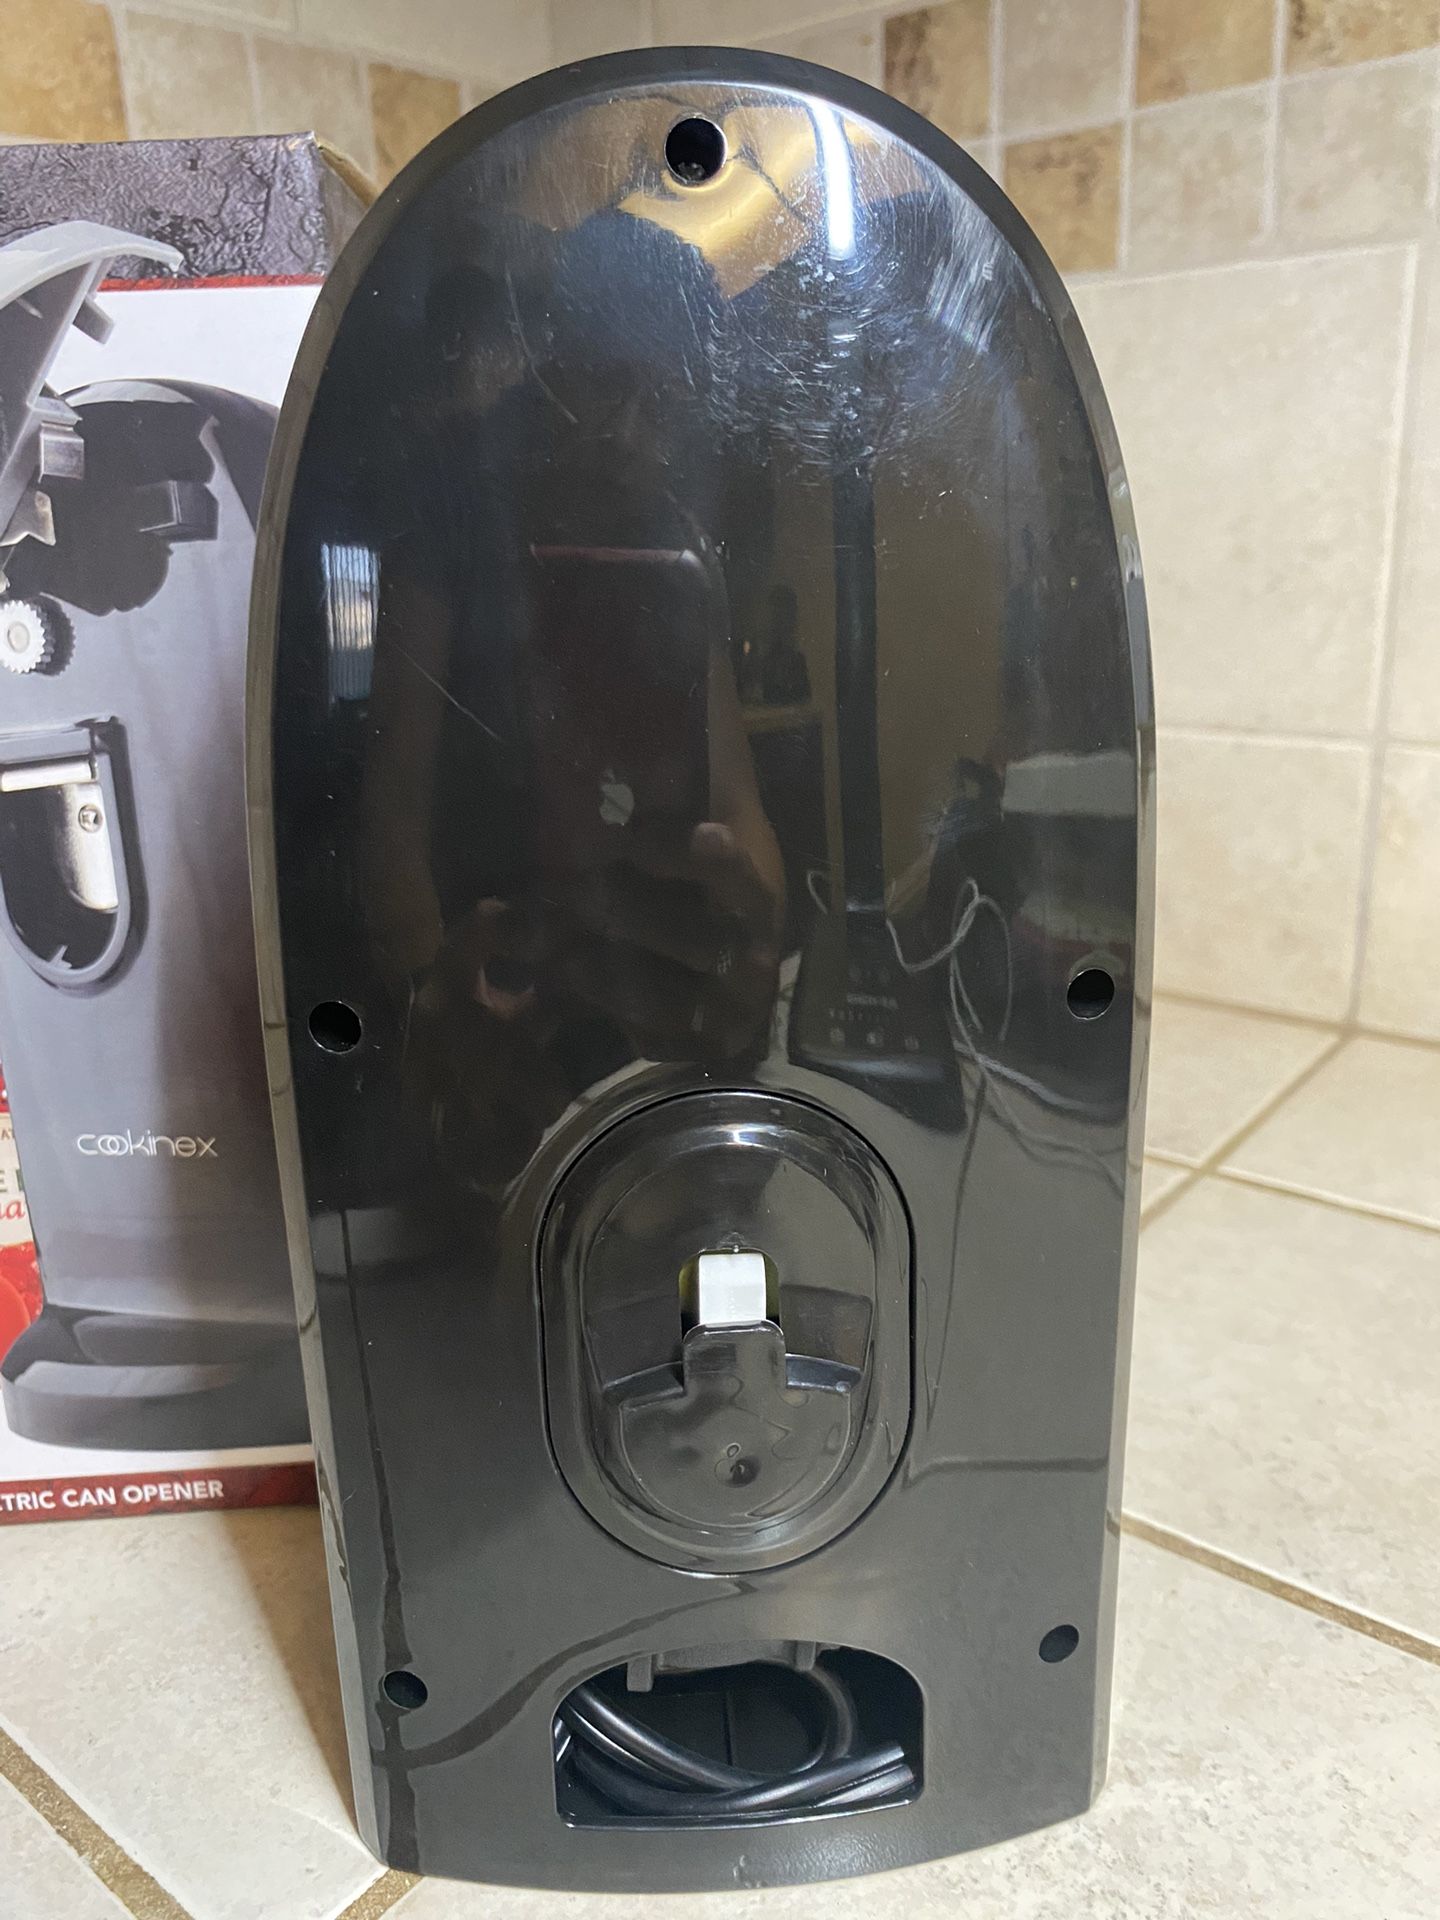 Abre Latas Eléctrico Electric Can Opener for Sale in Garden Grove, CA -  OfferUp